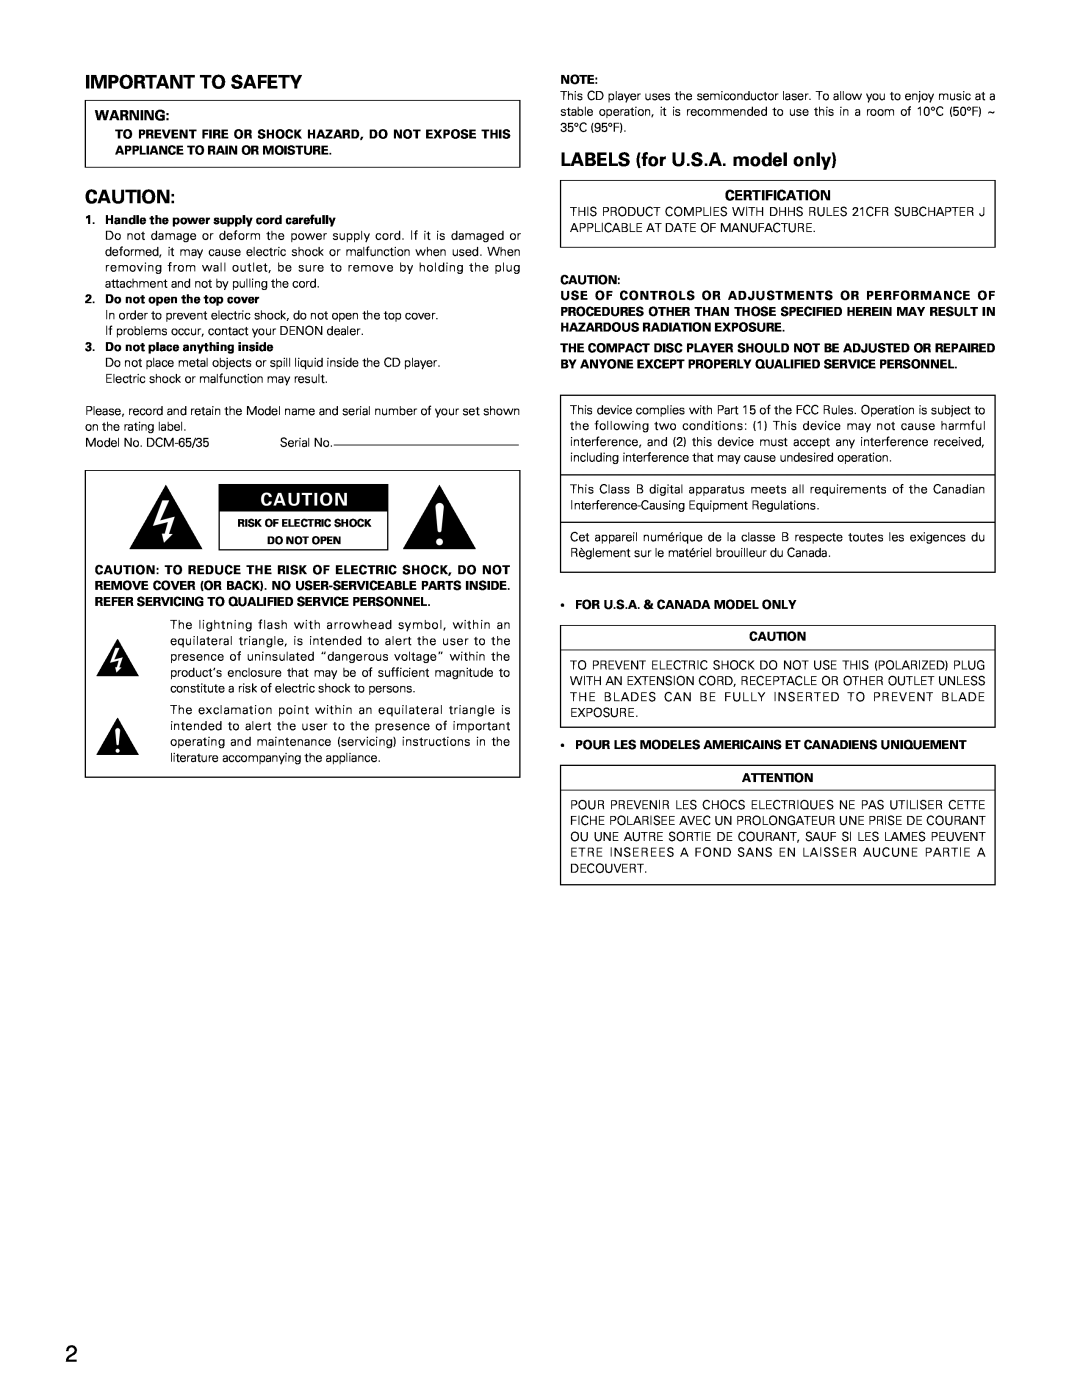 Denon DCM-65/35 manual Important To Safety, LABELS for U.S.A. model only, Certification 